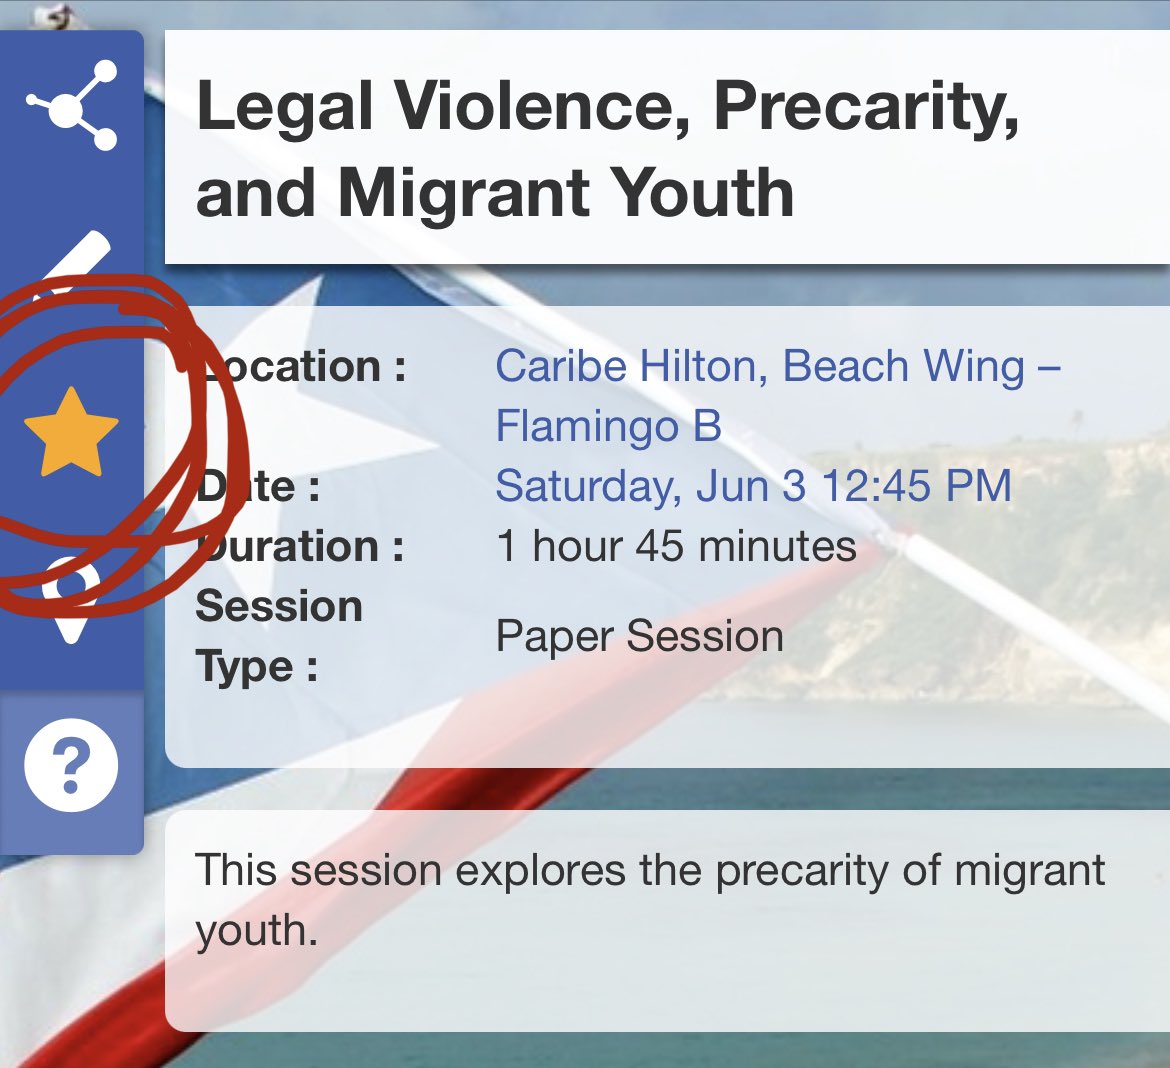 Heading to the LSA? While you’re at the airport, download the iPhone app here (apps.apple.com/us/app/lsa-eve…), then navigate to the session on Legal Violence, Precarity, and Migrant Youth and give it a ⭐️STAR⭐️ to add it to your schedule! #LSA @law_soc